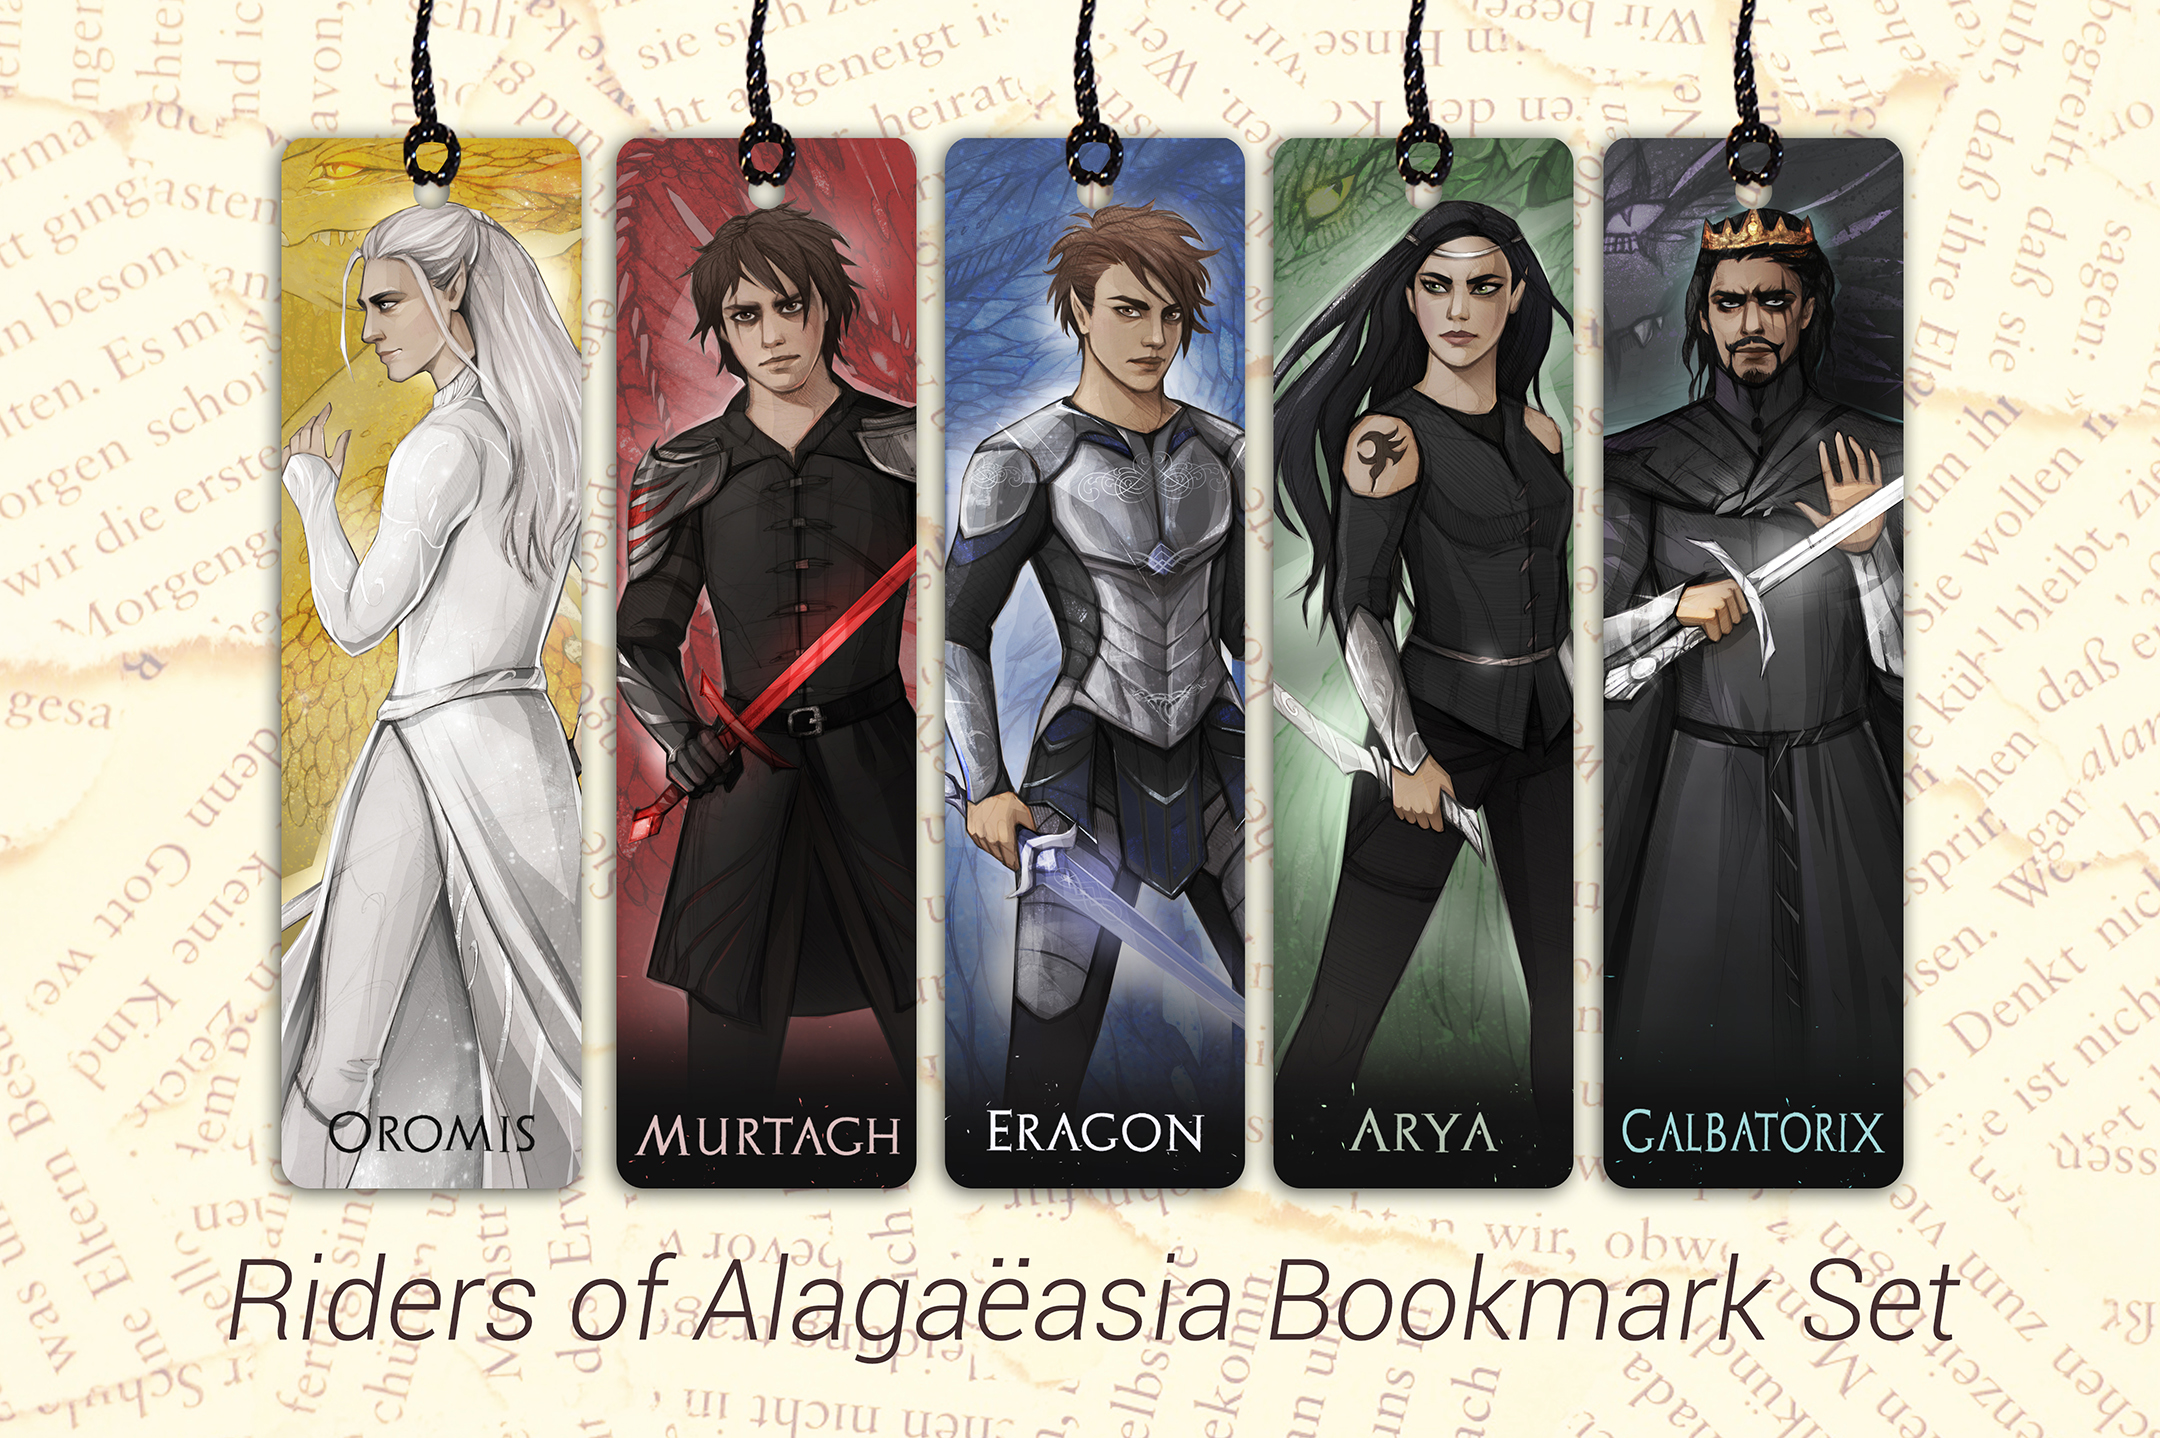 The Dragon Riders have returned in our new set of Inheritance Cycle bookmarks!